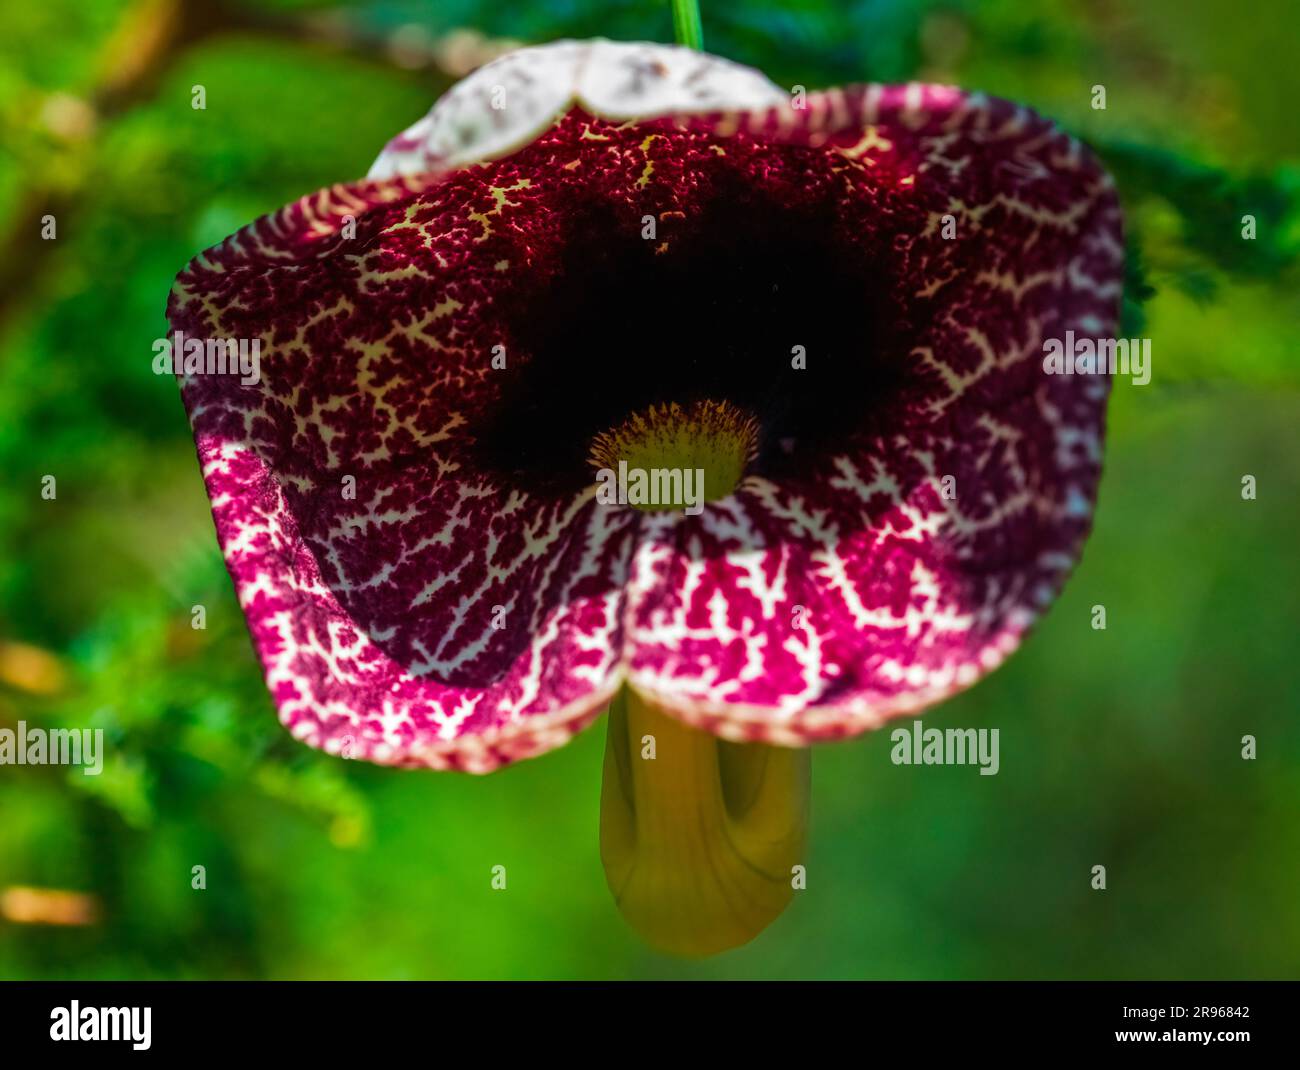 Calico flower. A close up of a calico flower (Aristolochia littoralis), also known as Dutchmen's pipe or locally as Oupa se pyp plant. Stock Photo